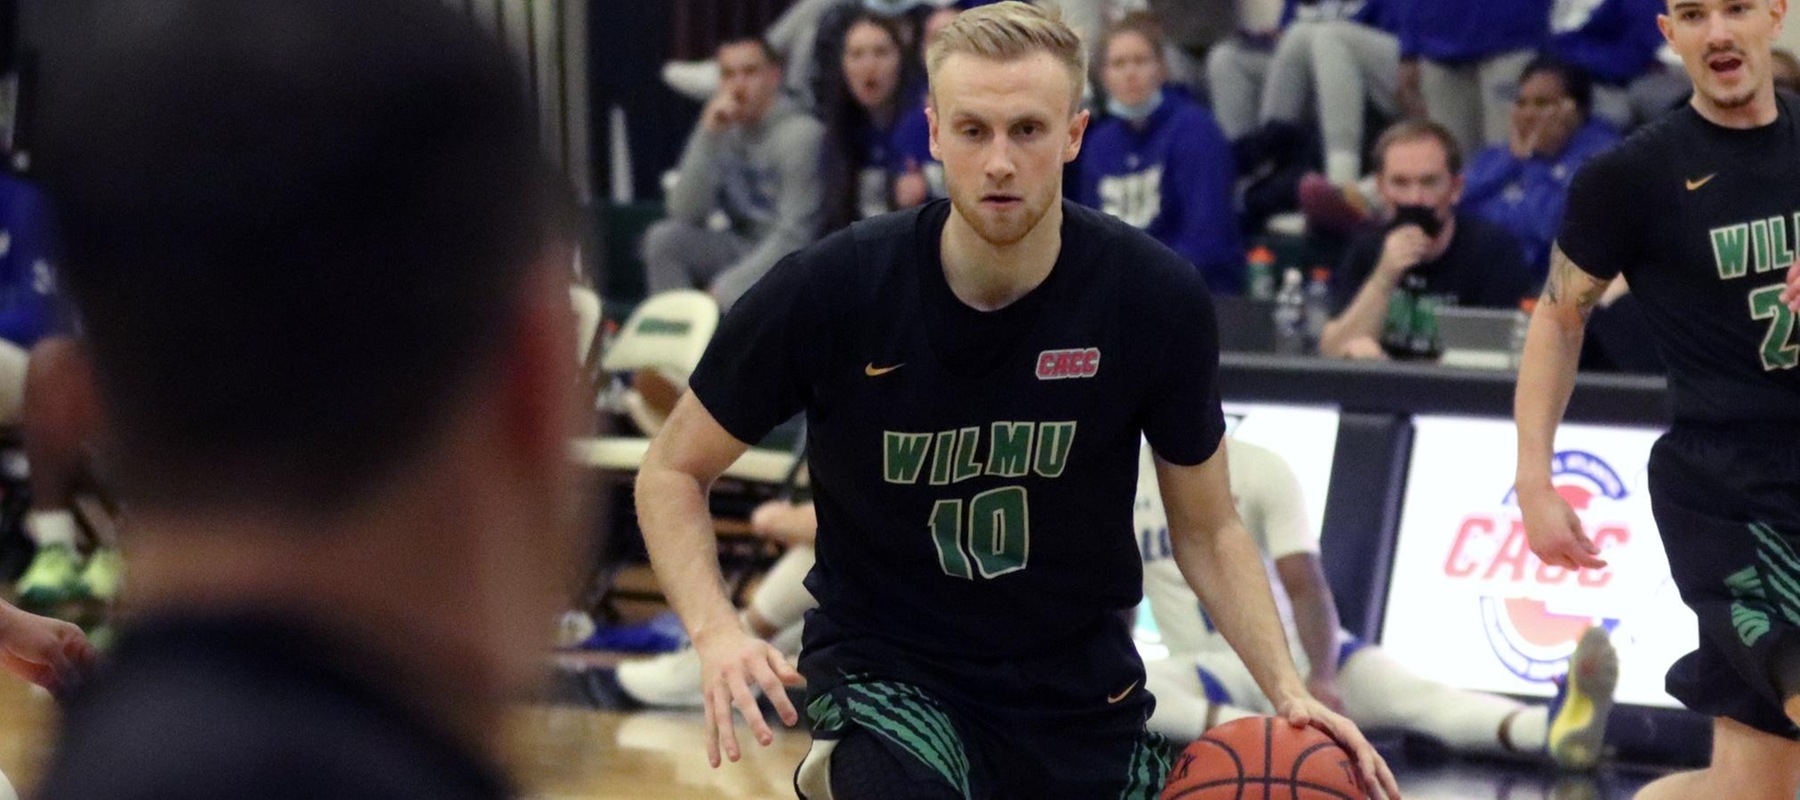 File photo of Caleb Matthews who scored 20 of his 26 points in the second half at Post.  Copyright 2022; Wilmington University. All rights reserved. Photo by Dan Lauletta. February 15, 2022 vs. Georgian Court.